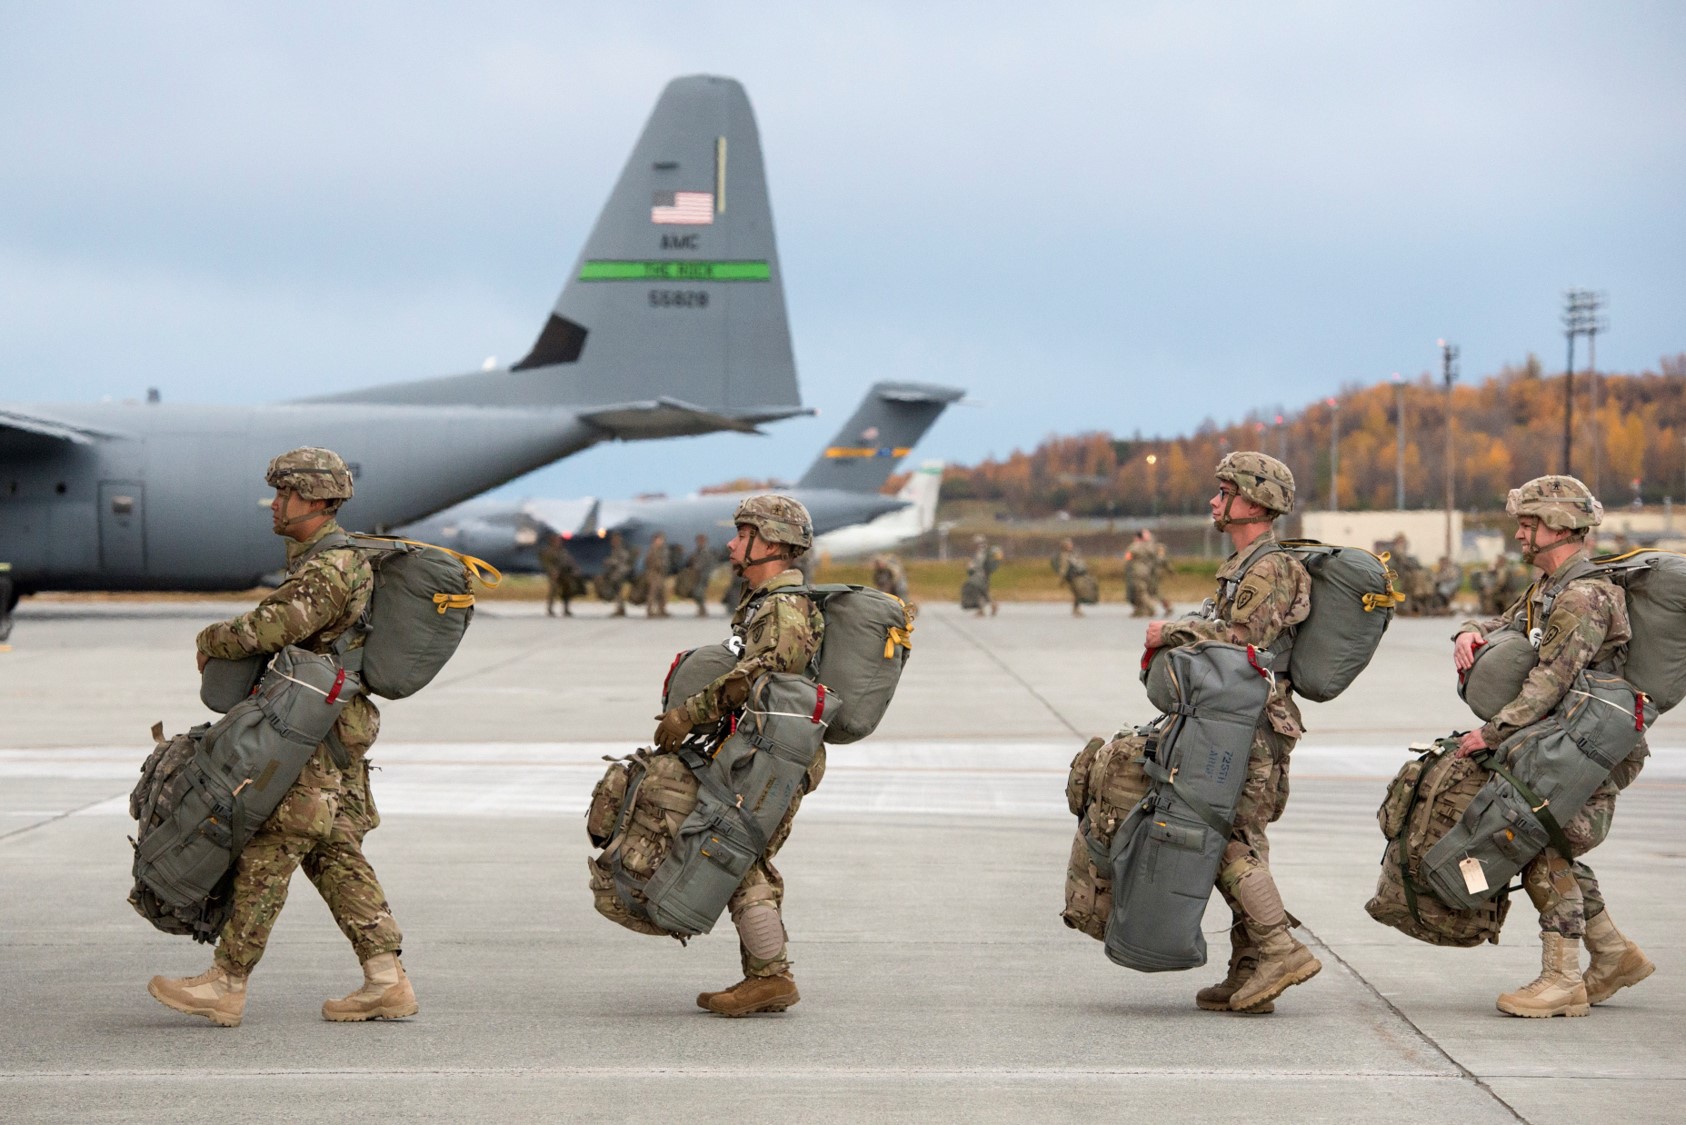 Image of a US Air Force Soldiers